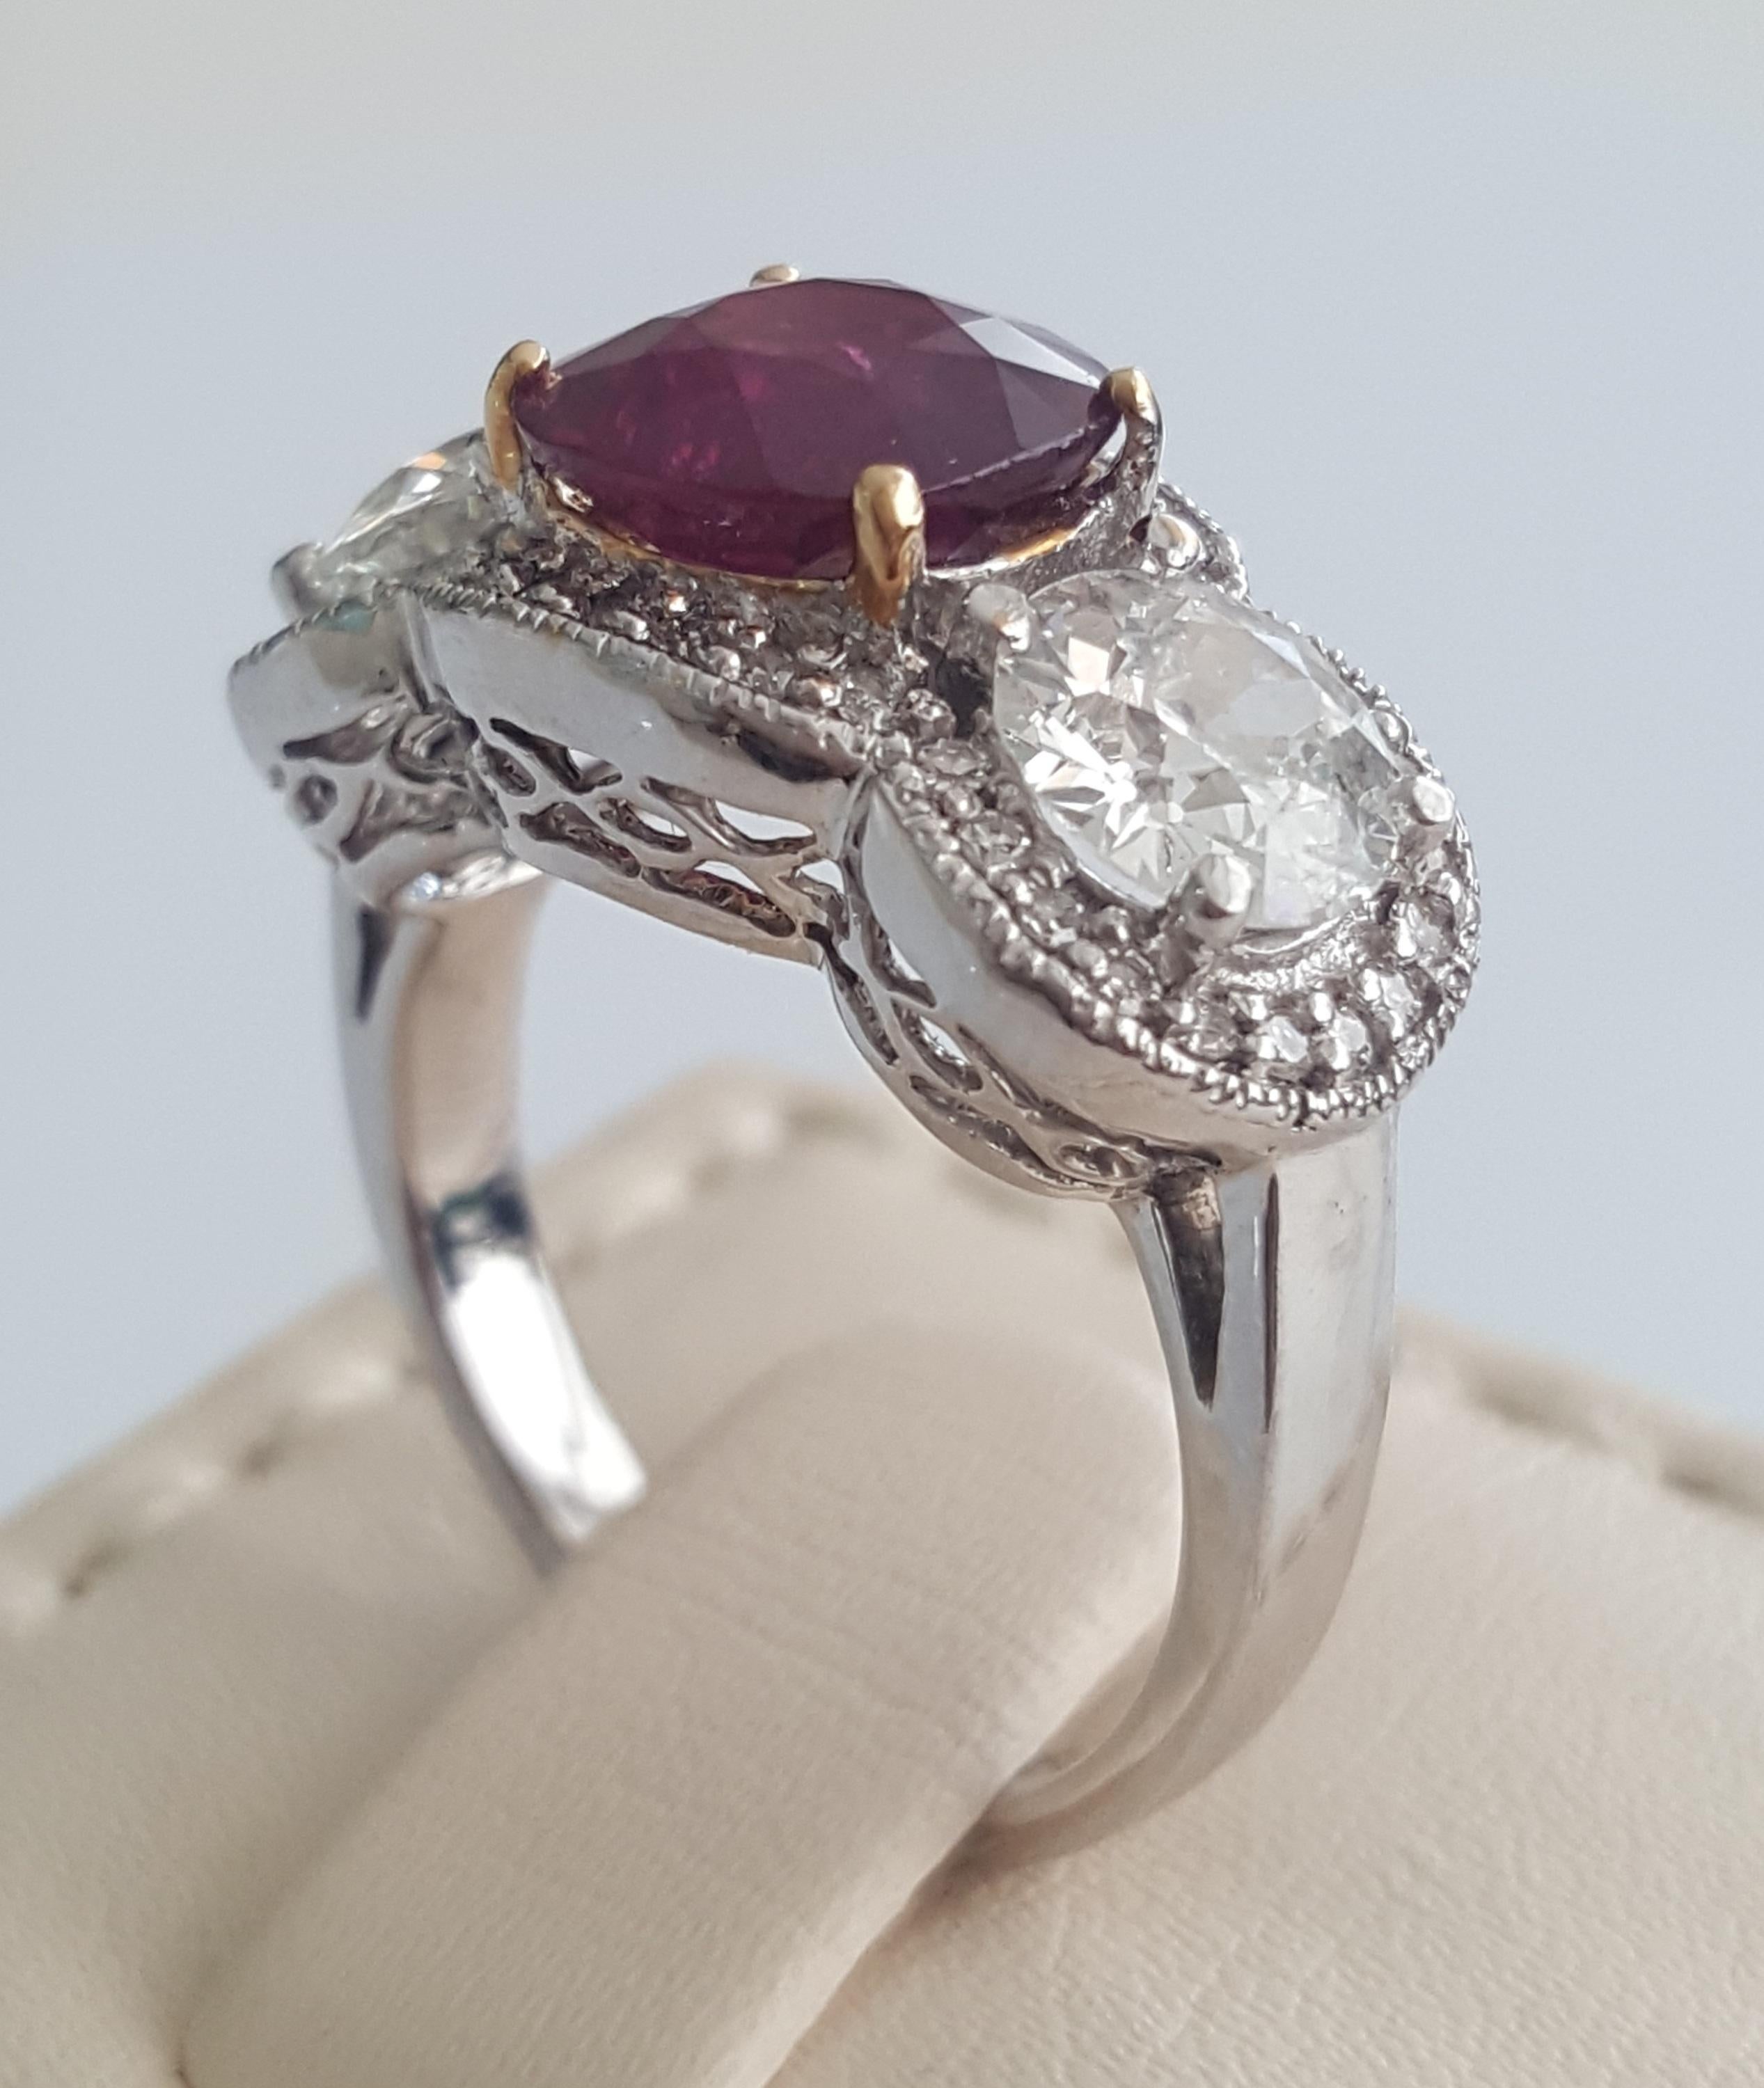 This understated, elegant and enticing three stone ring designed and manufactured by Moguldiam Inc features natural cushion ruby weighing 3.05 carat flanked by two round white old cut diamond weighing weighing 1.74 carat with H color and VS clarity